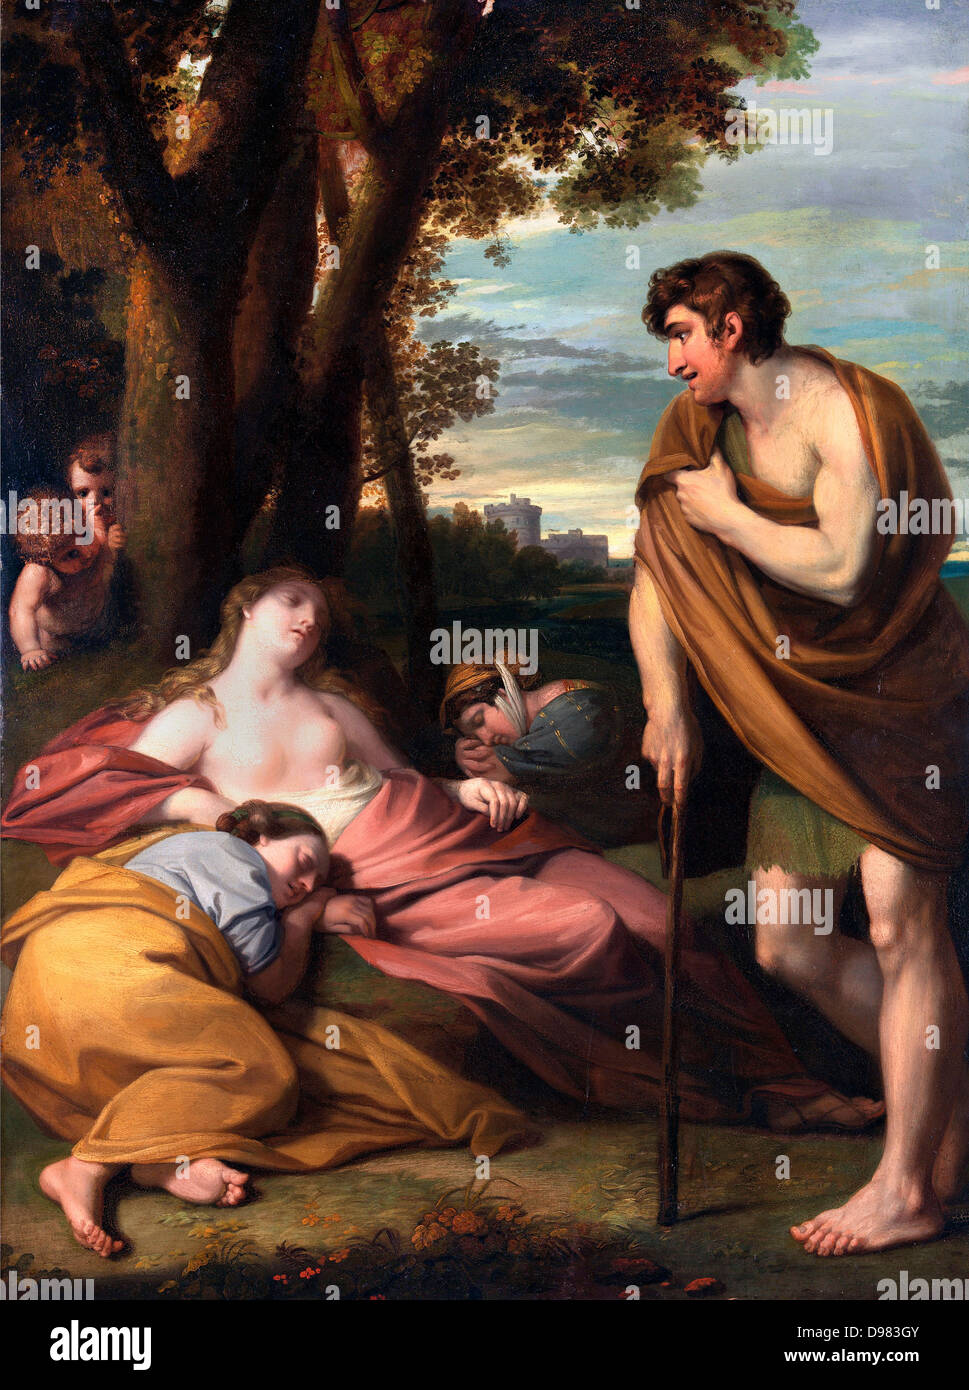 Benjamin West, Cymon and Iphigenia. Circa 1766. Oil on canvas. Yale Center for British Art, New Haven, Connecticut, USA. Stock Photo